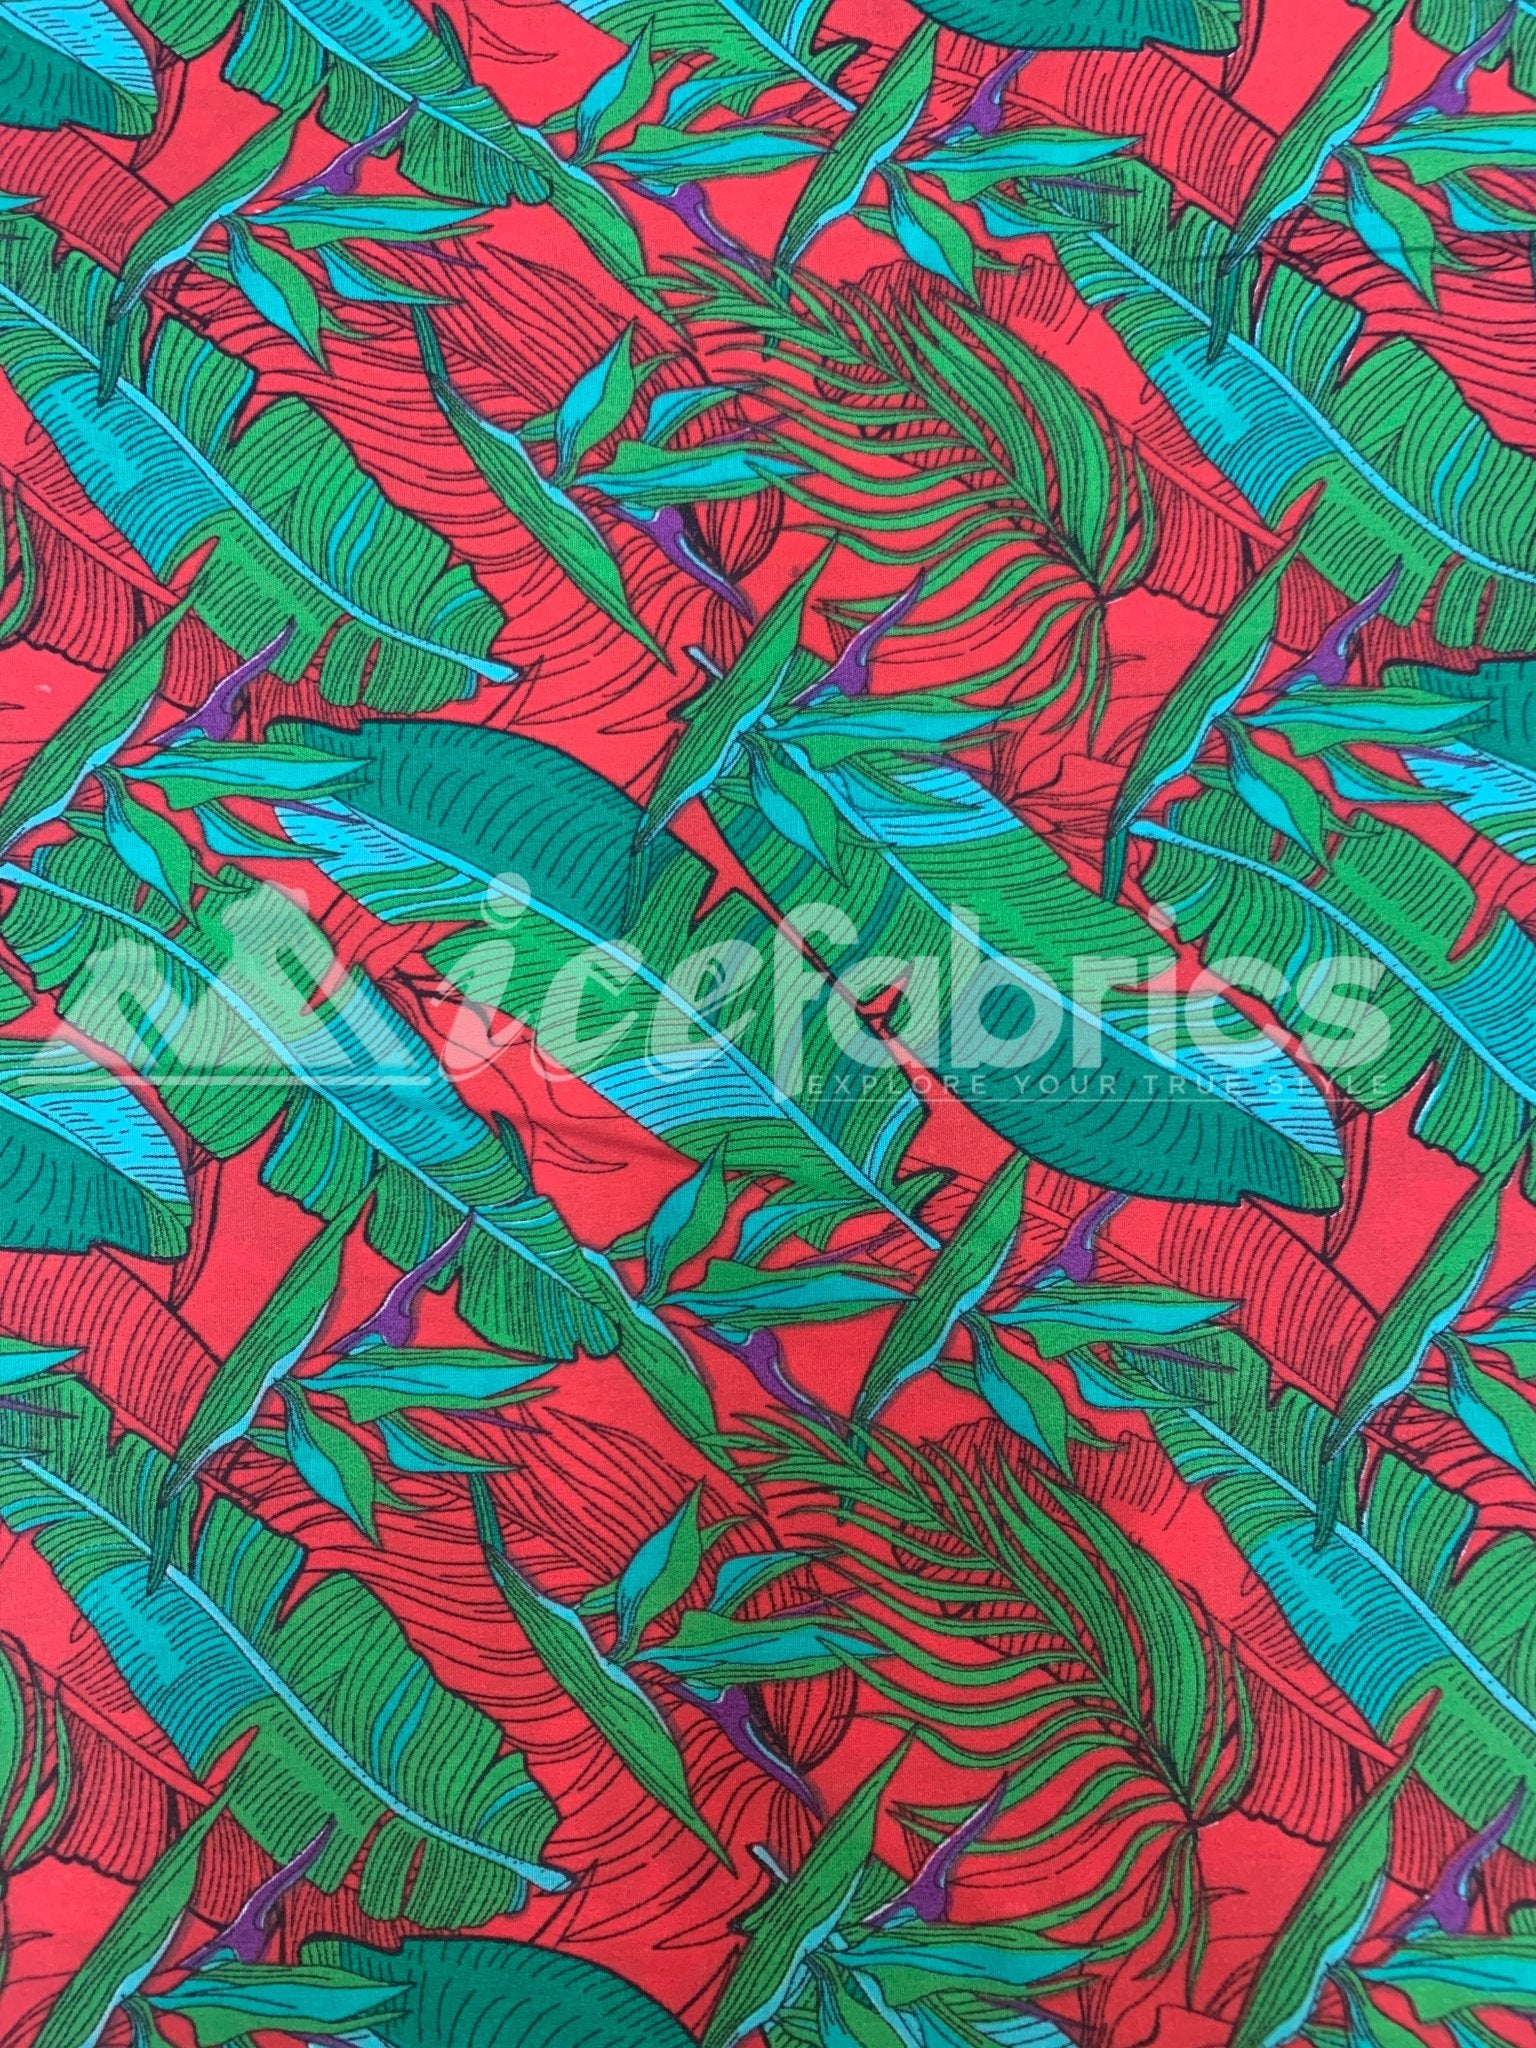 Fashion Fabric Leaf Print Poly Cotton Fabric By The Yard (Red, Purple, Blue)Cotton FabricICEFABRICICE FABRICSRedFashion Fabric Leaf Print Poly Cotton Fabric By The Yard (Red, Purple, Blue) ICEFABRIC Red